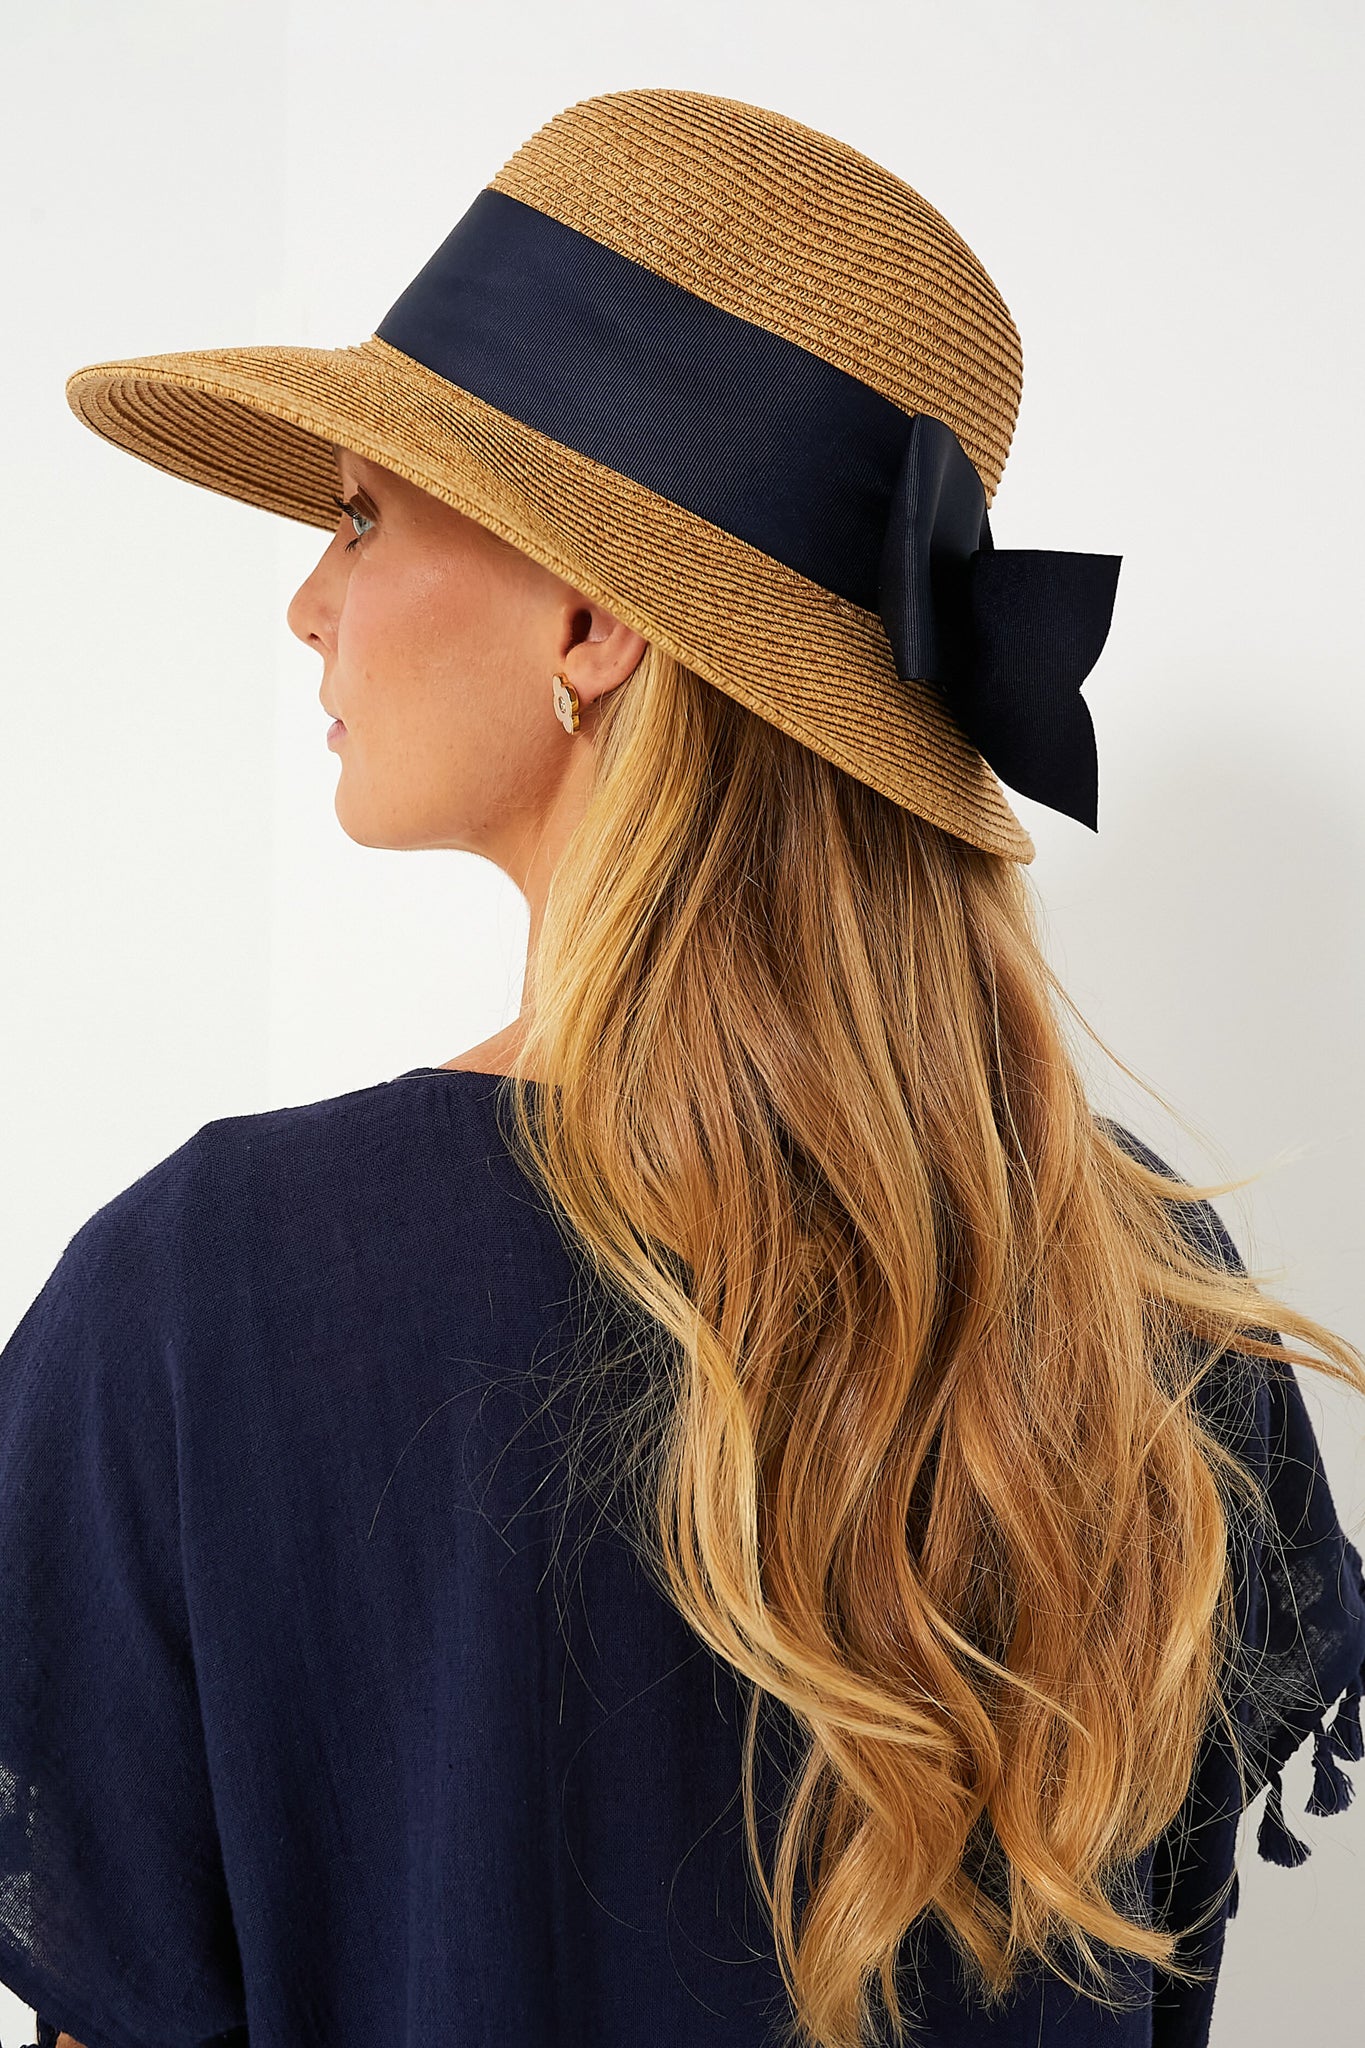 Packable Tuckernuck Bow Hat Review: My Most Worn Spring and Summer